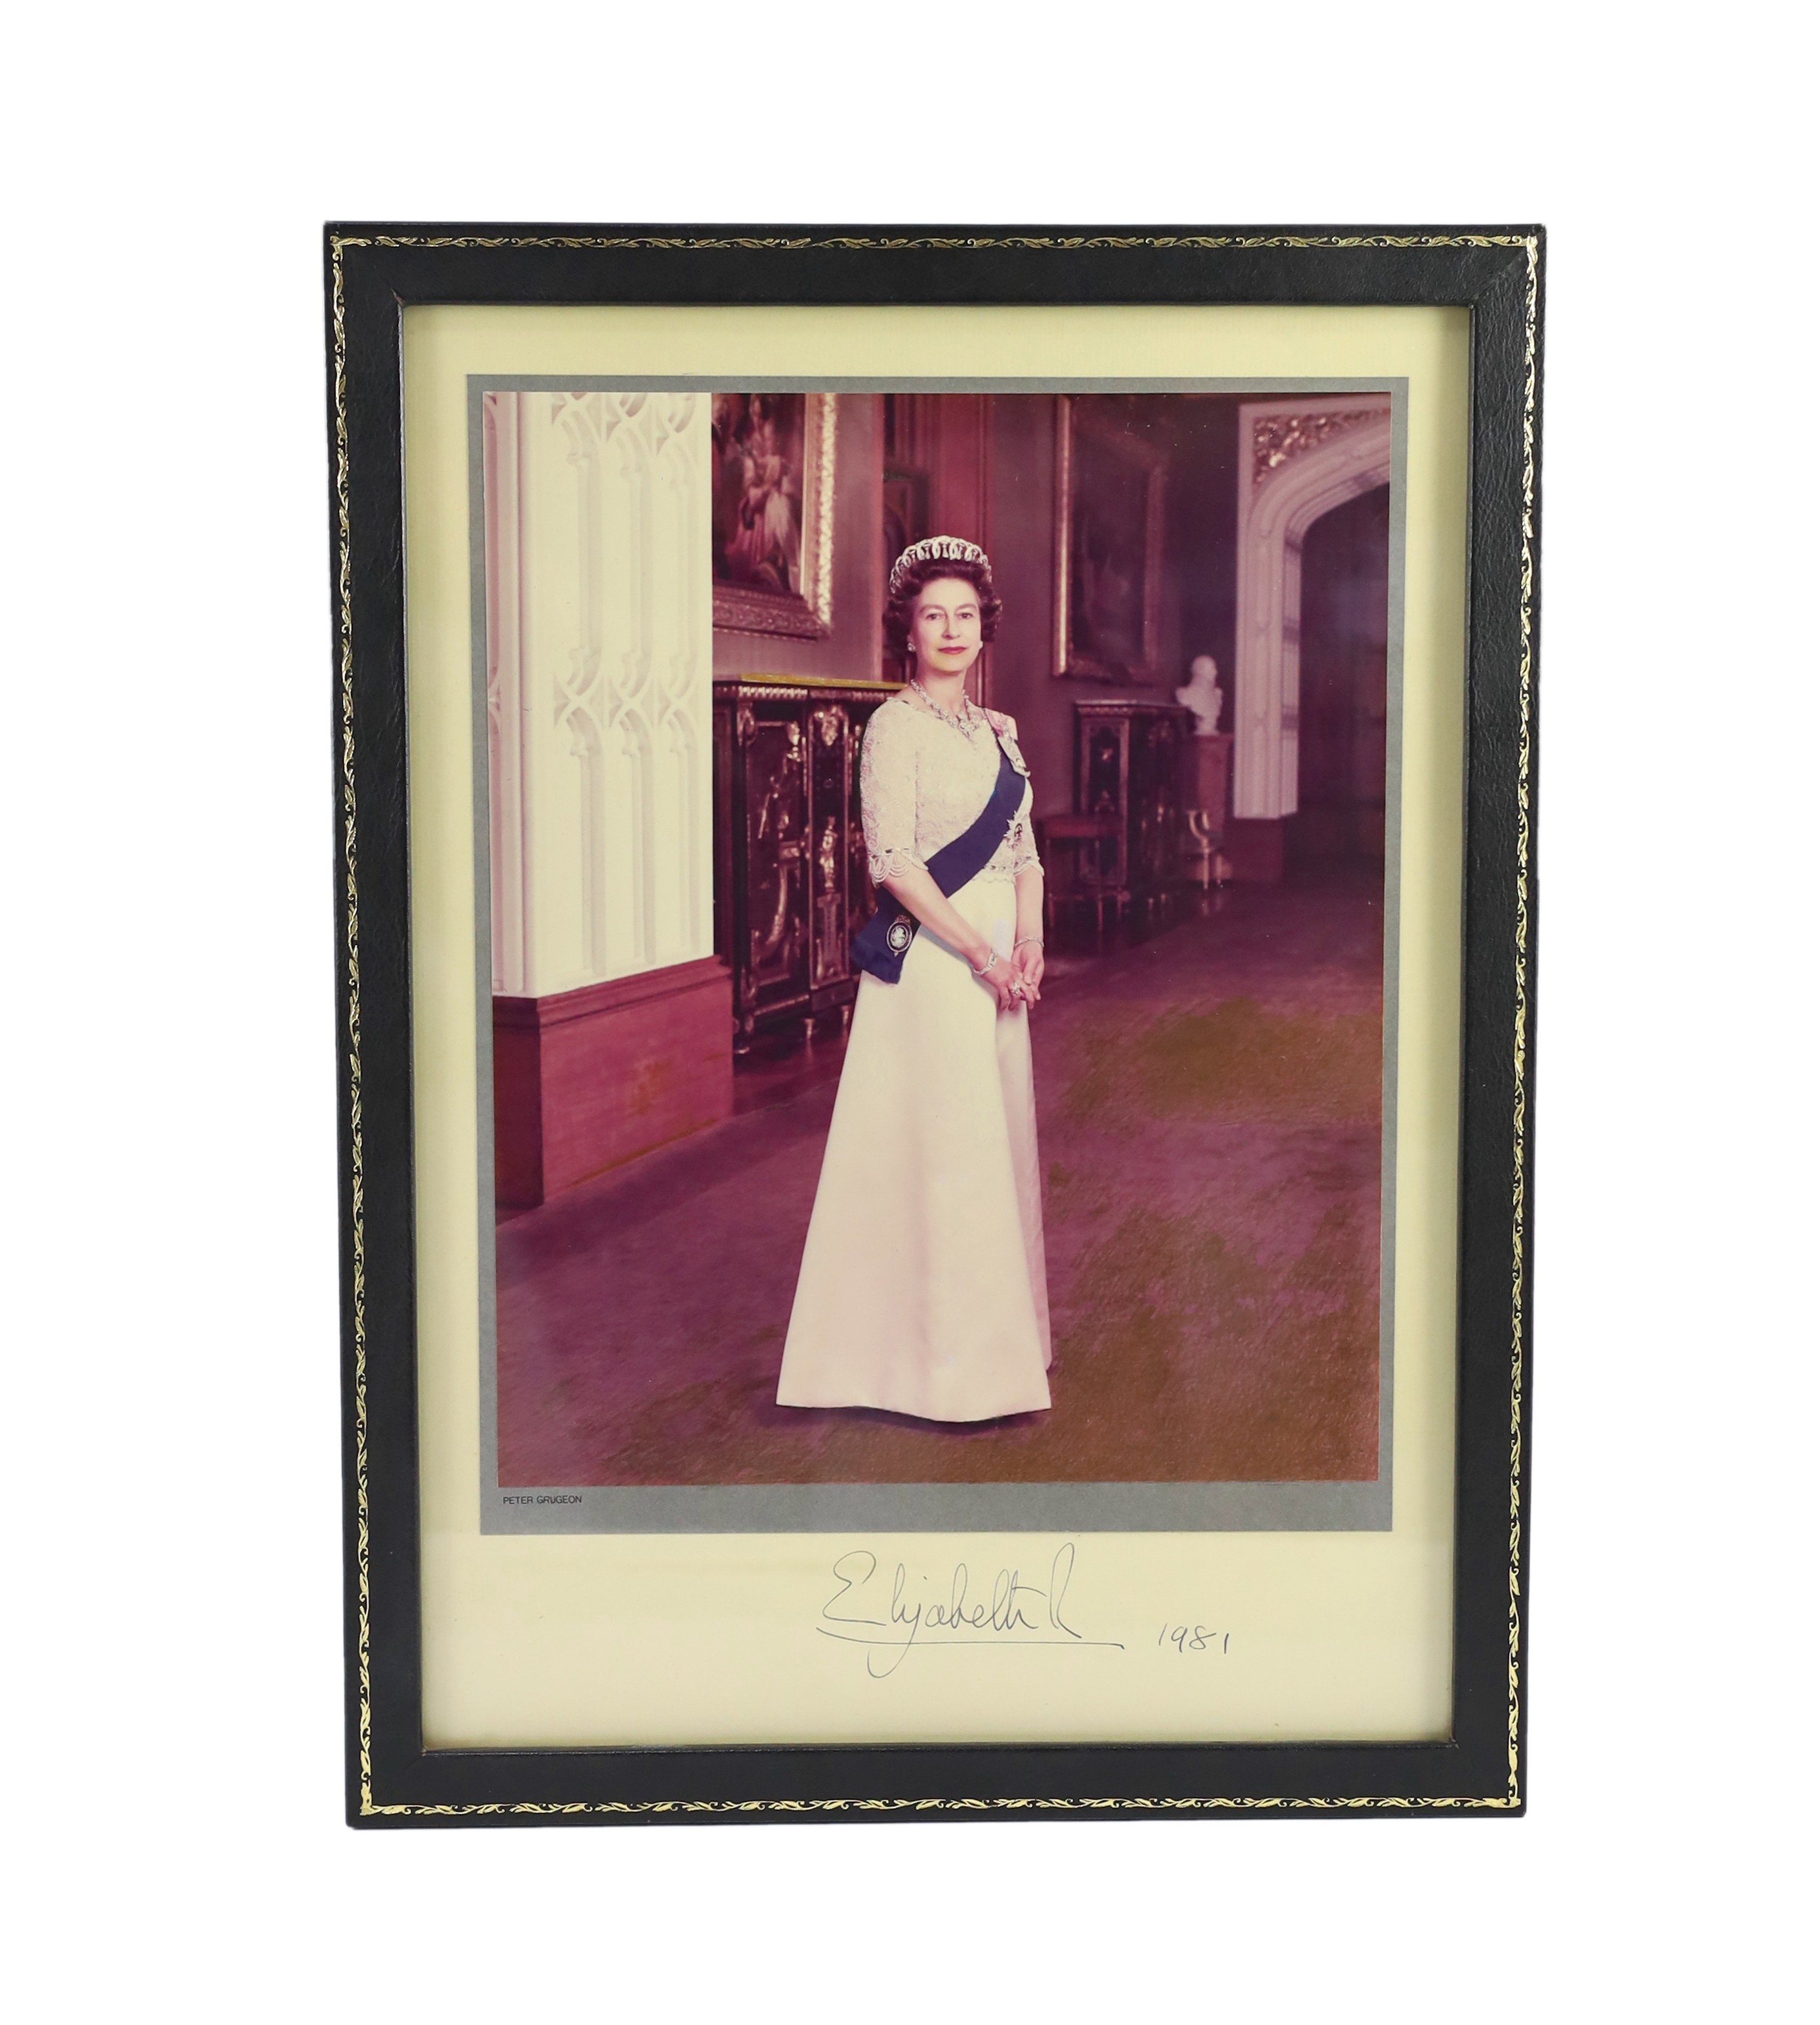 A signed colour photograph of Her Majesty Queen Elizabeth II, the Official Portrait taken by Peter Grugeon for the 1977 Silver Jubilee, signed and dated 1981